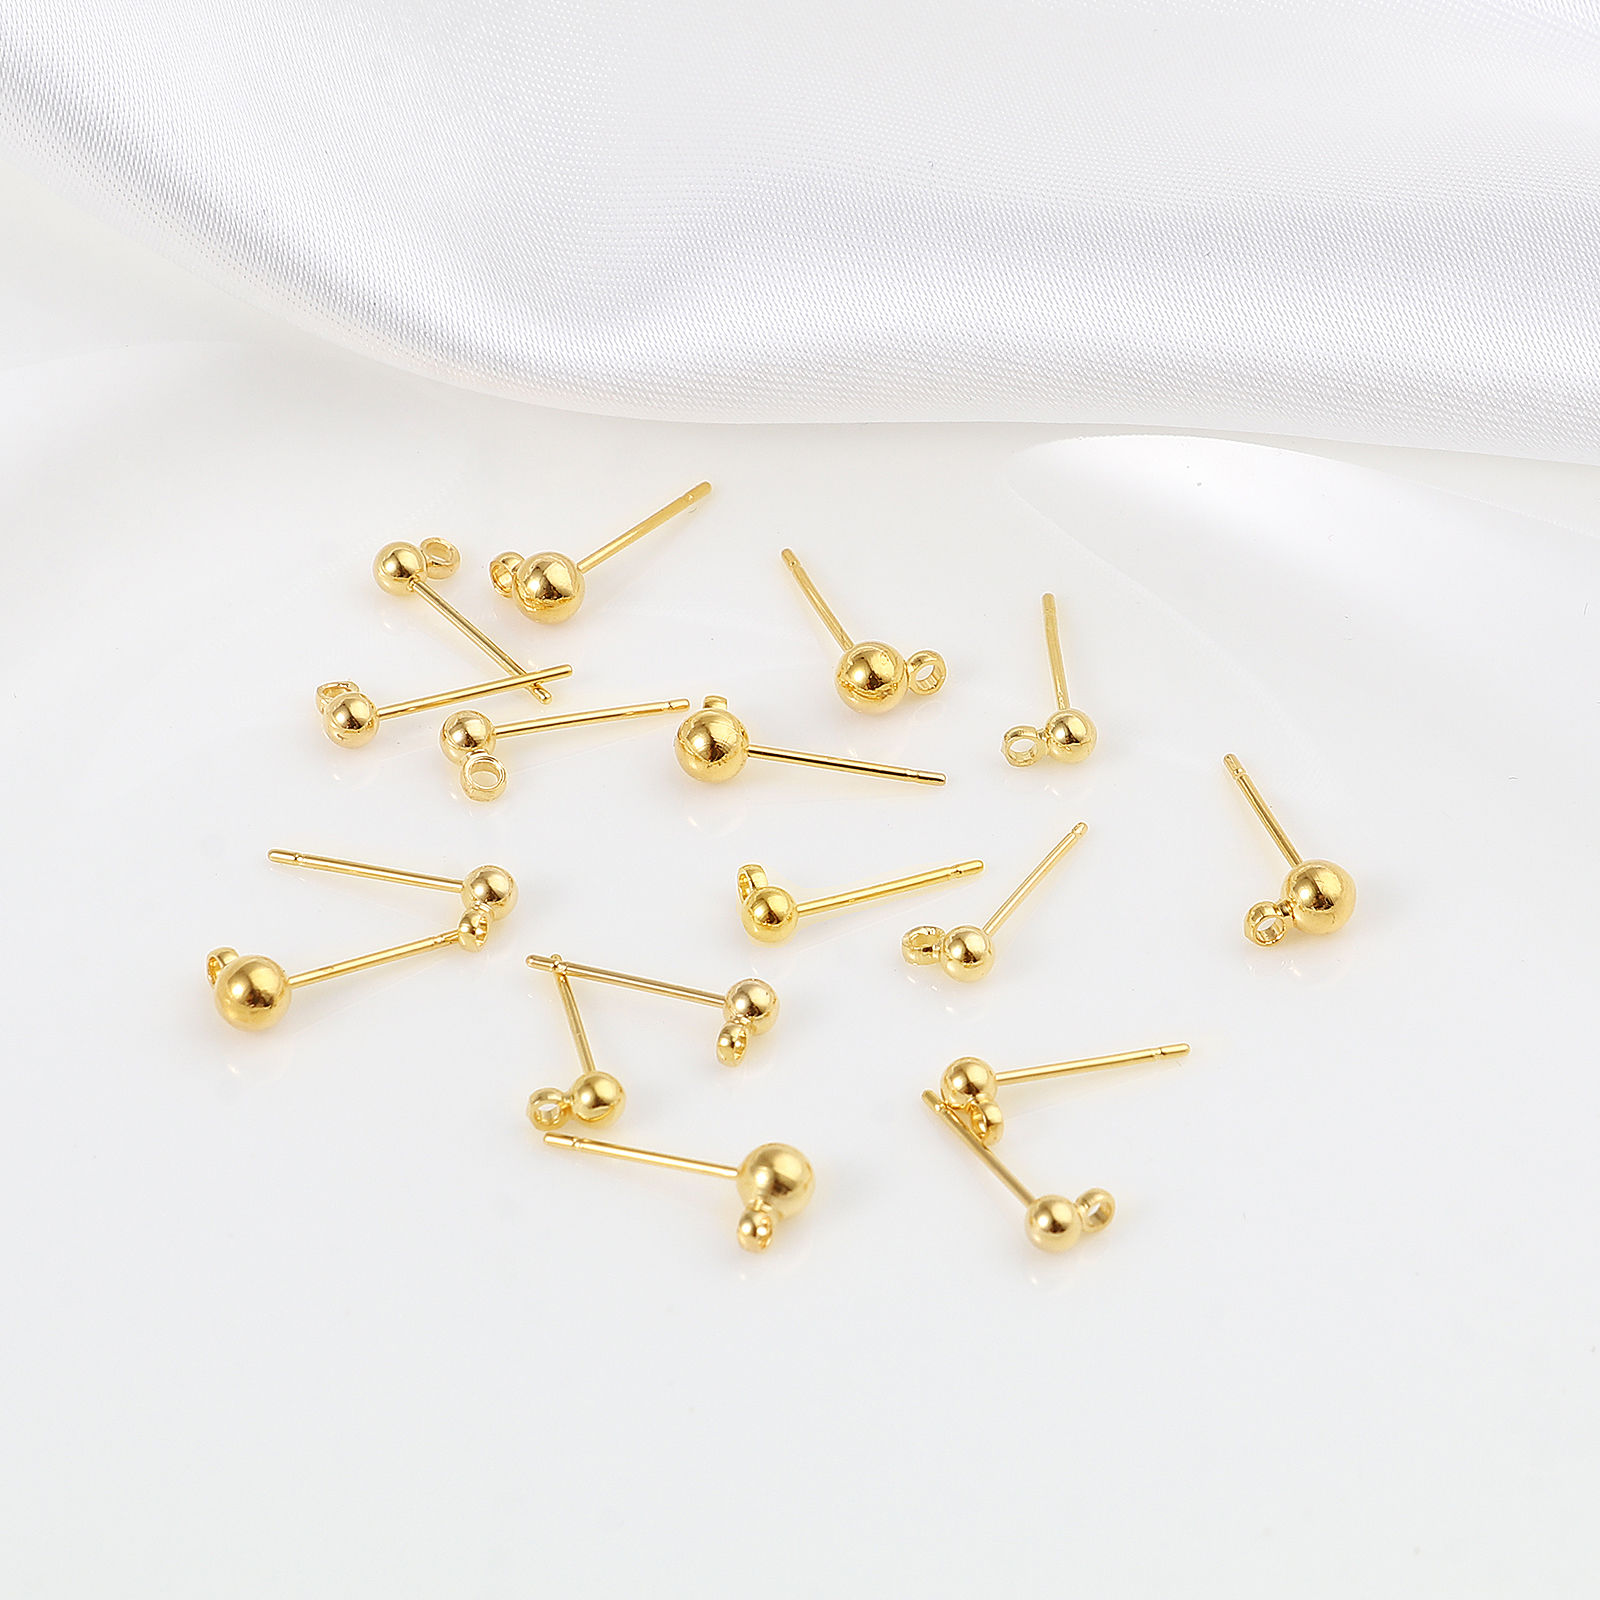 Picture of Copper Ear Post Stud Earrings 18K Real Gold Plated Ball W/ Loop 6mm x 4mm, Post/ Wire Size: (21 gauge), 10 PCs